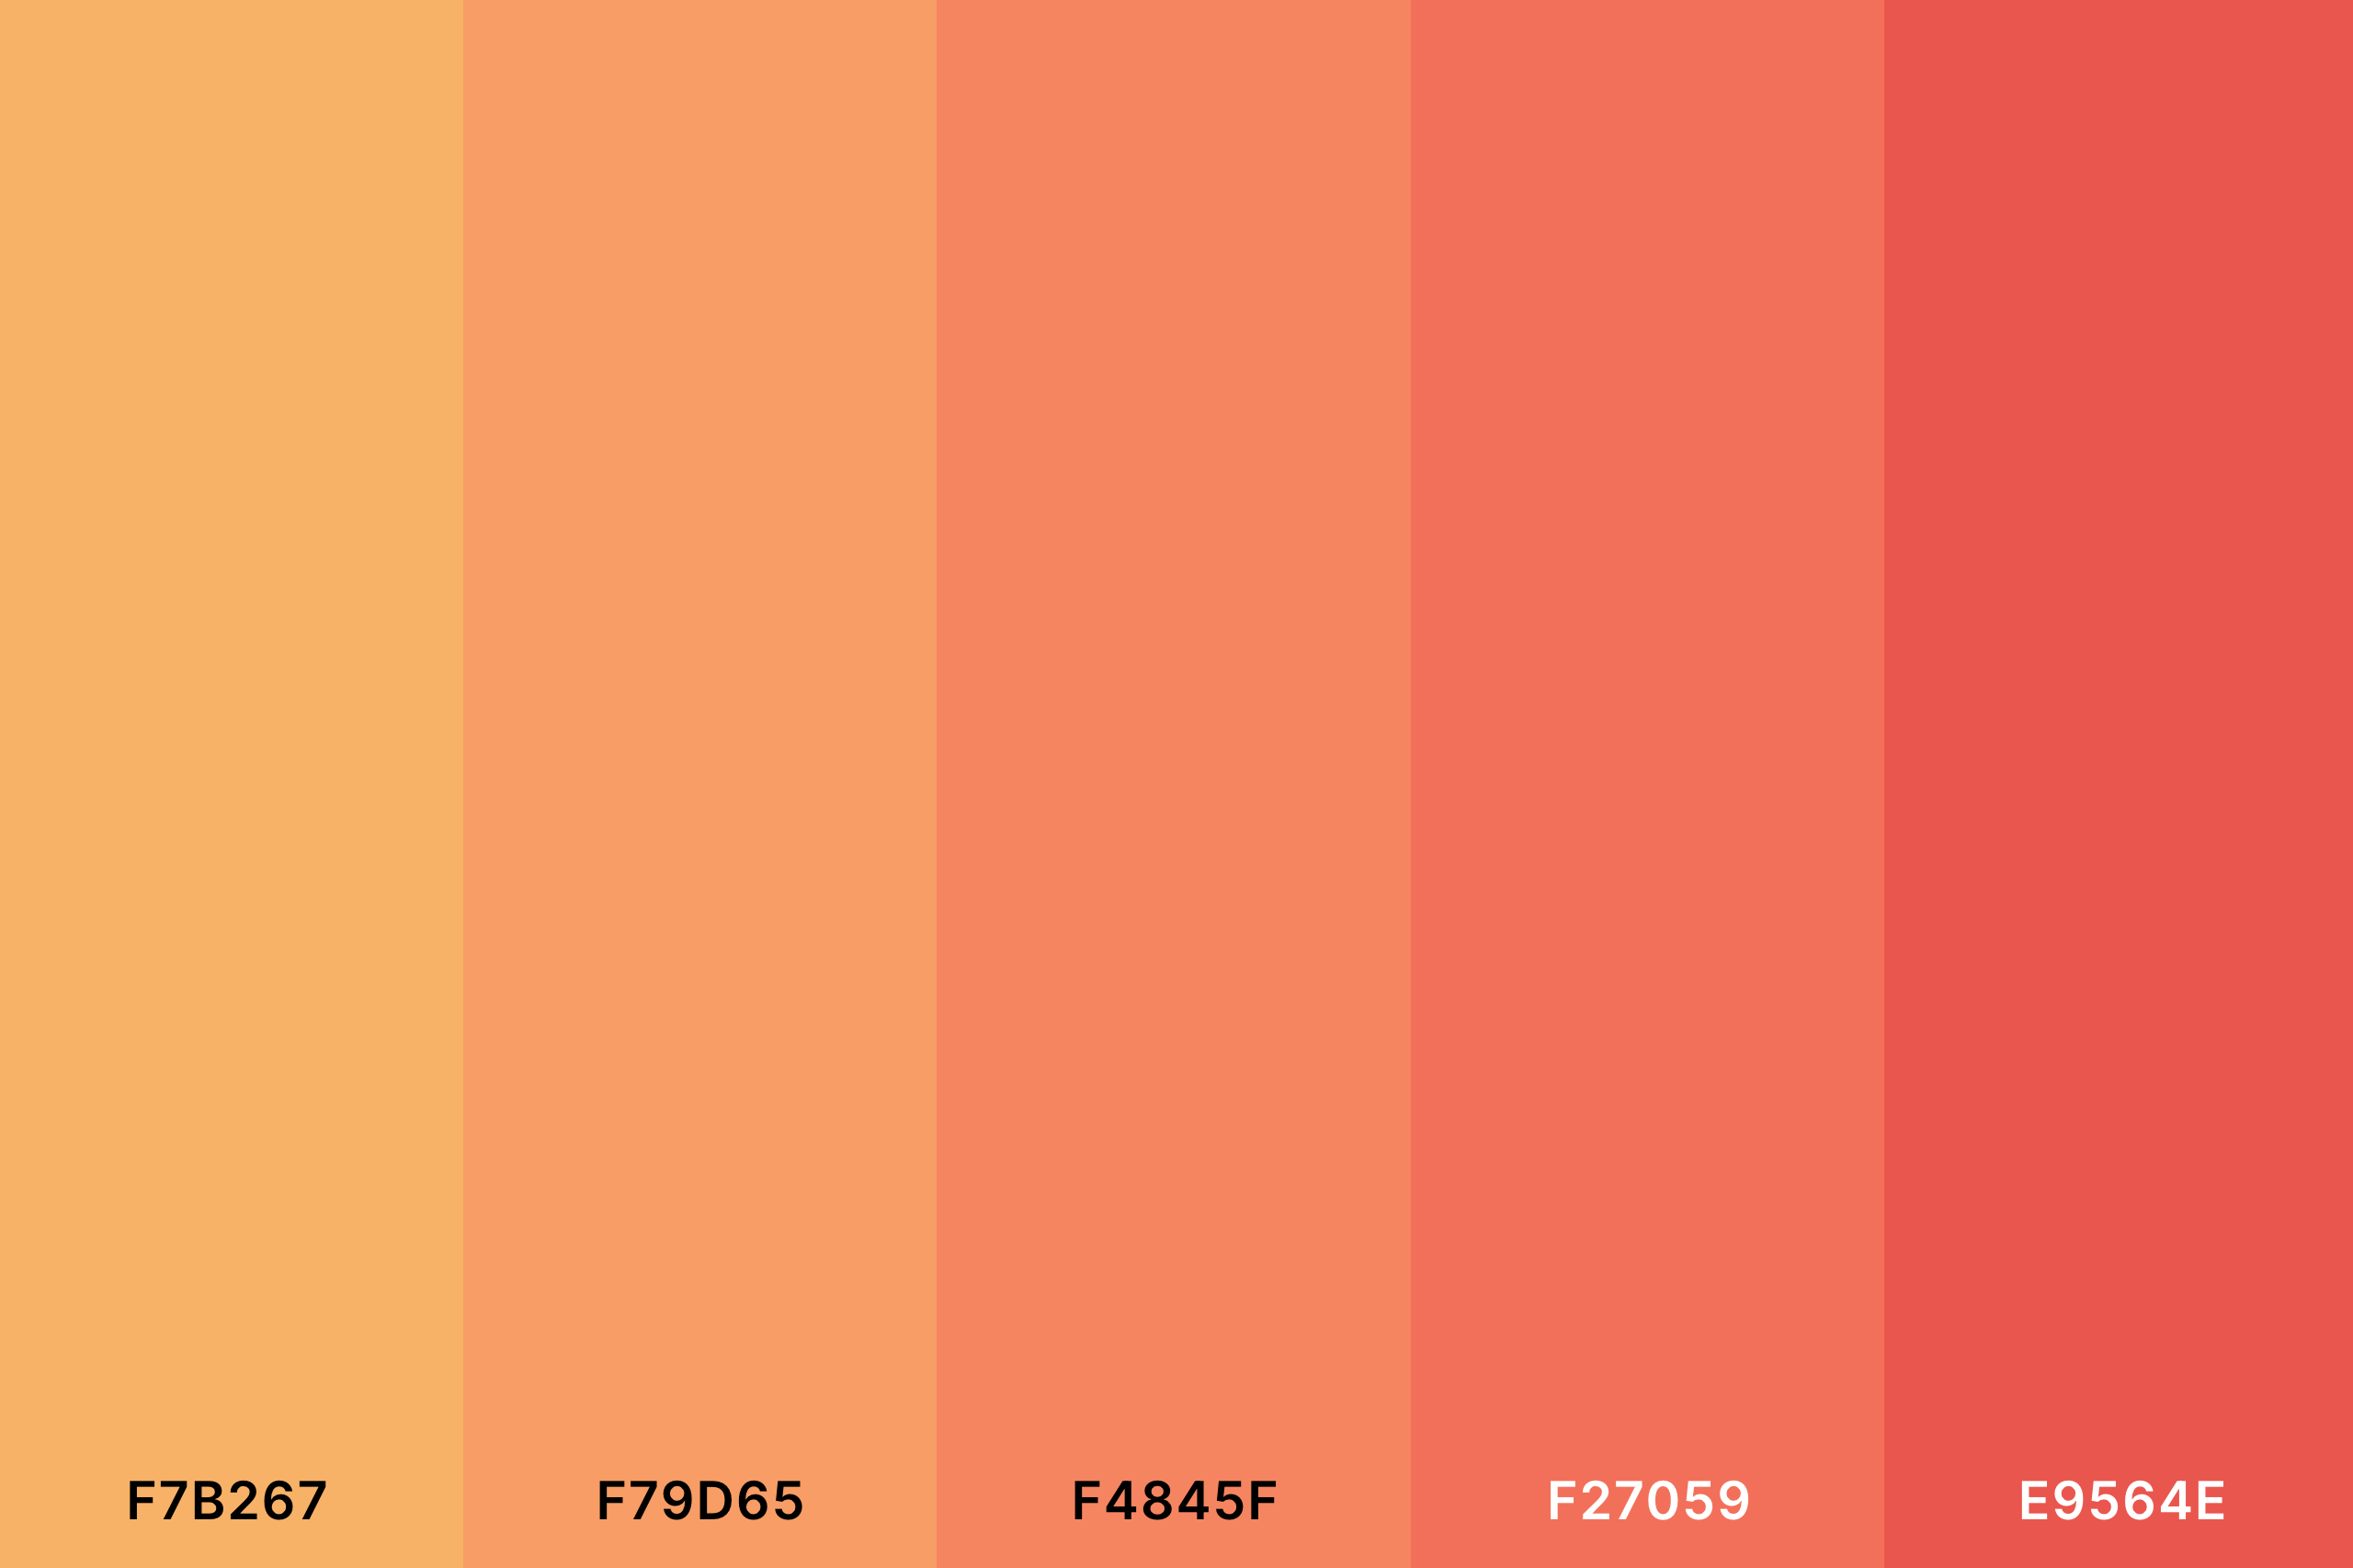 Orange Peach Color Palette with Fawn (Hex #F7B267) + Atomic Tangerine (Hex #F79D65) + Coral (Hex #F4845F) + Bittersweet (Hex #F27059) + Vermilion (Hex #E9564E) Color Palette with Hex Codes